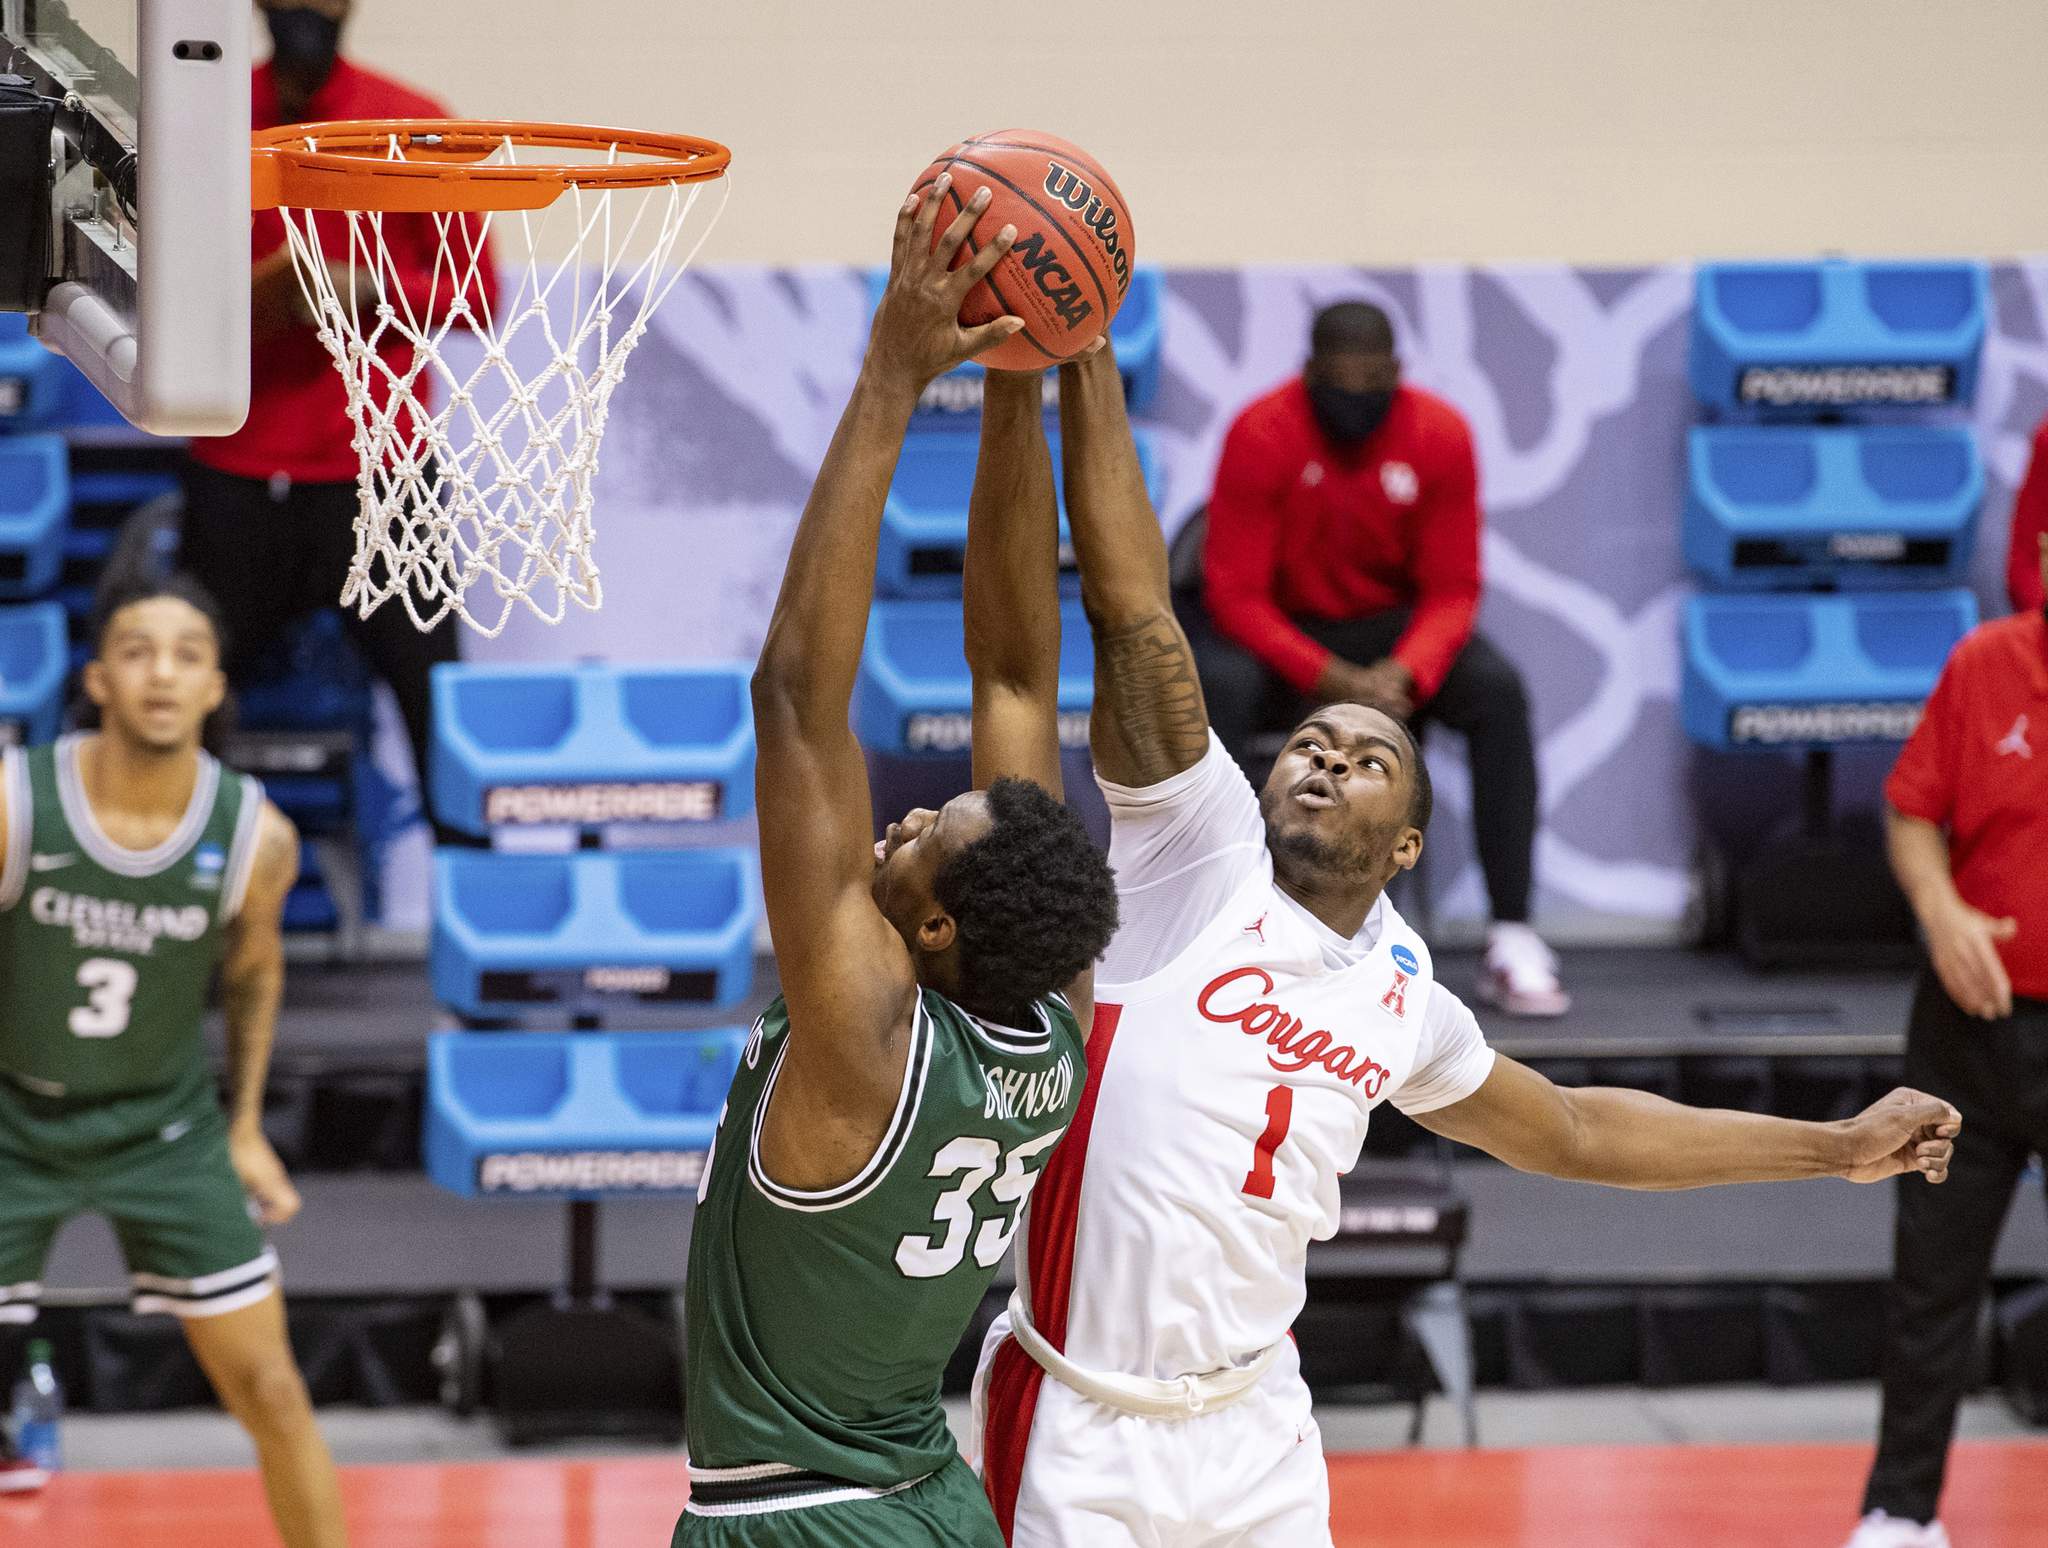 Houston beats Cleveland State 87-56 as Sampson ties Wooden